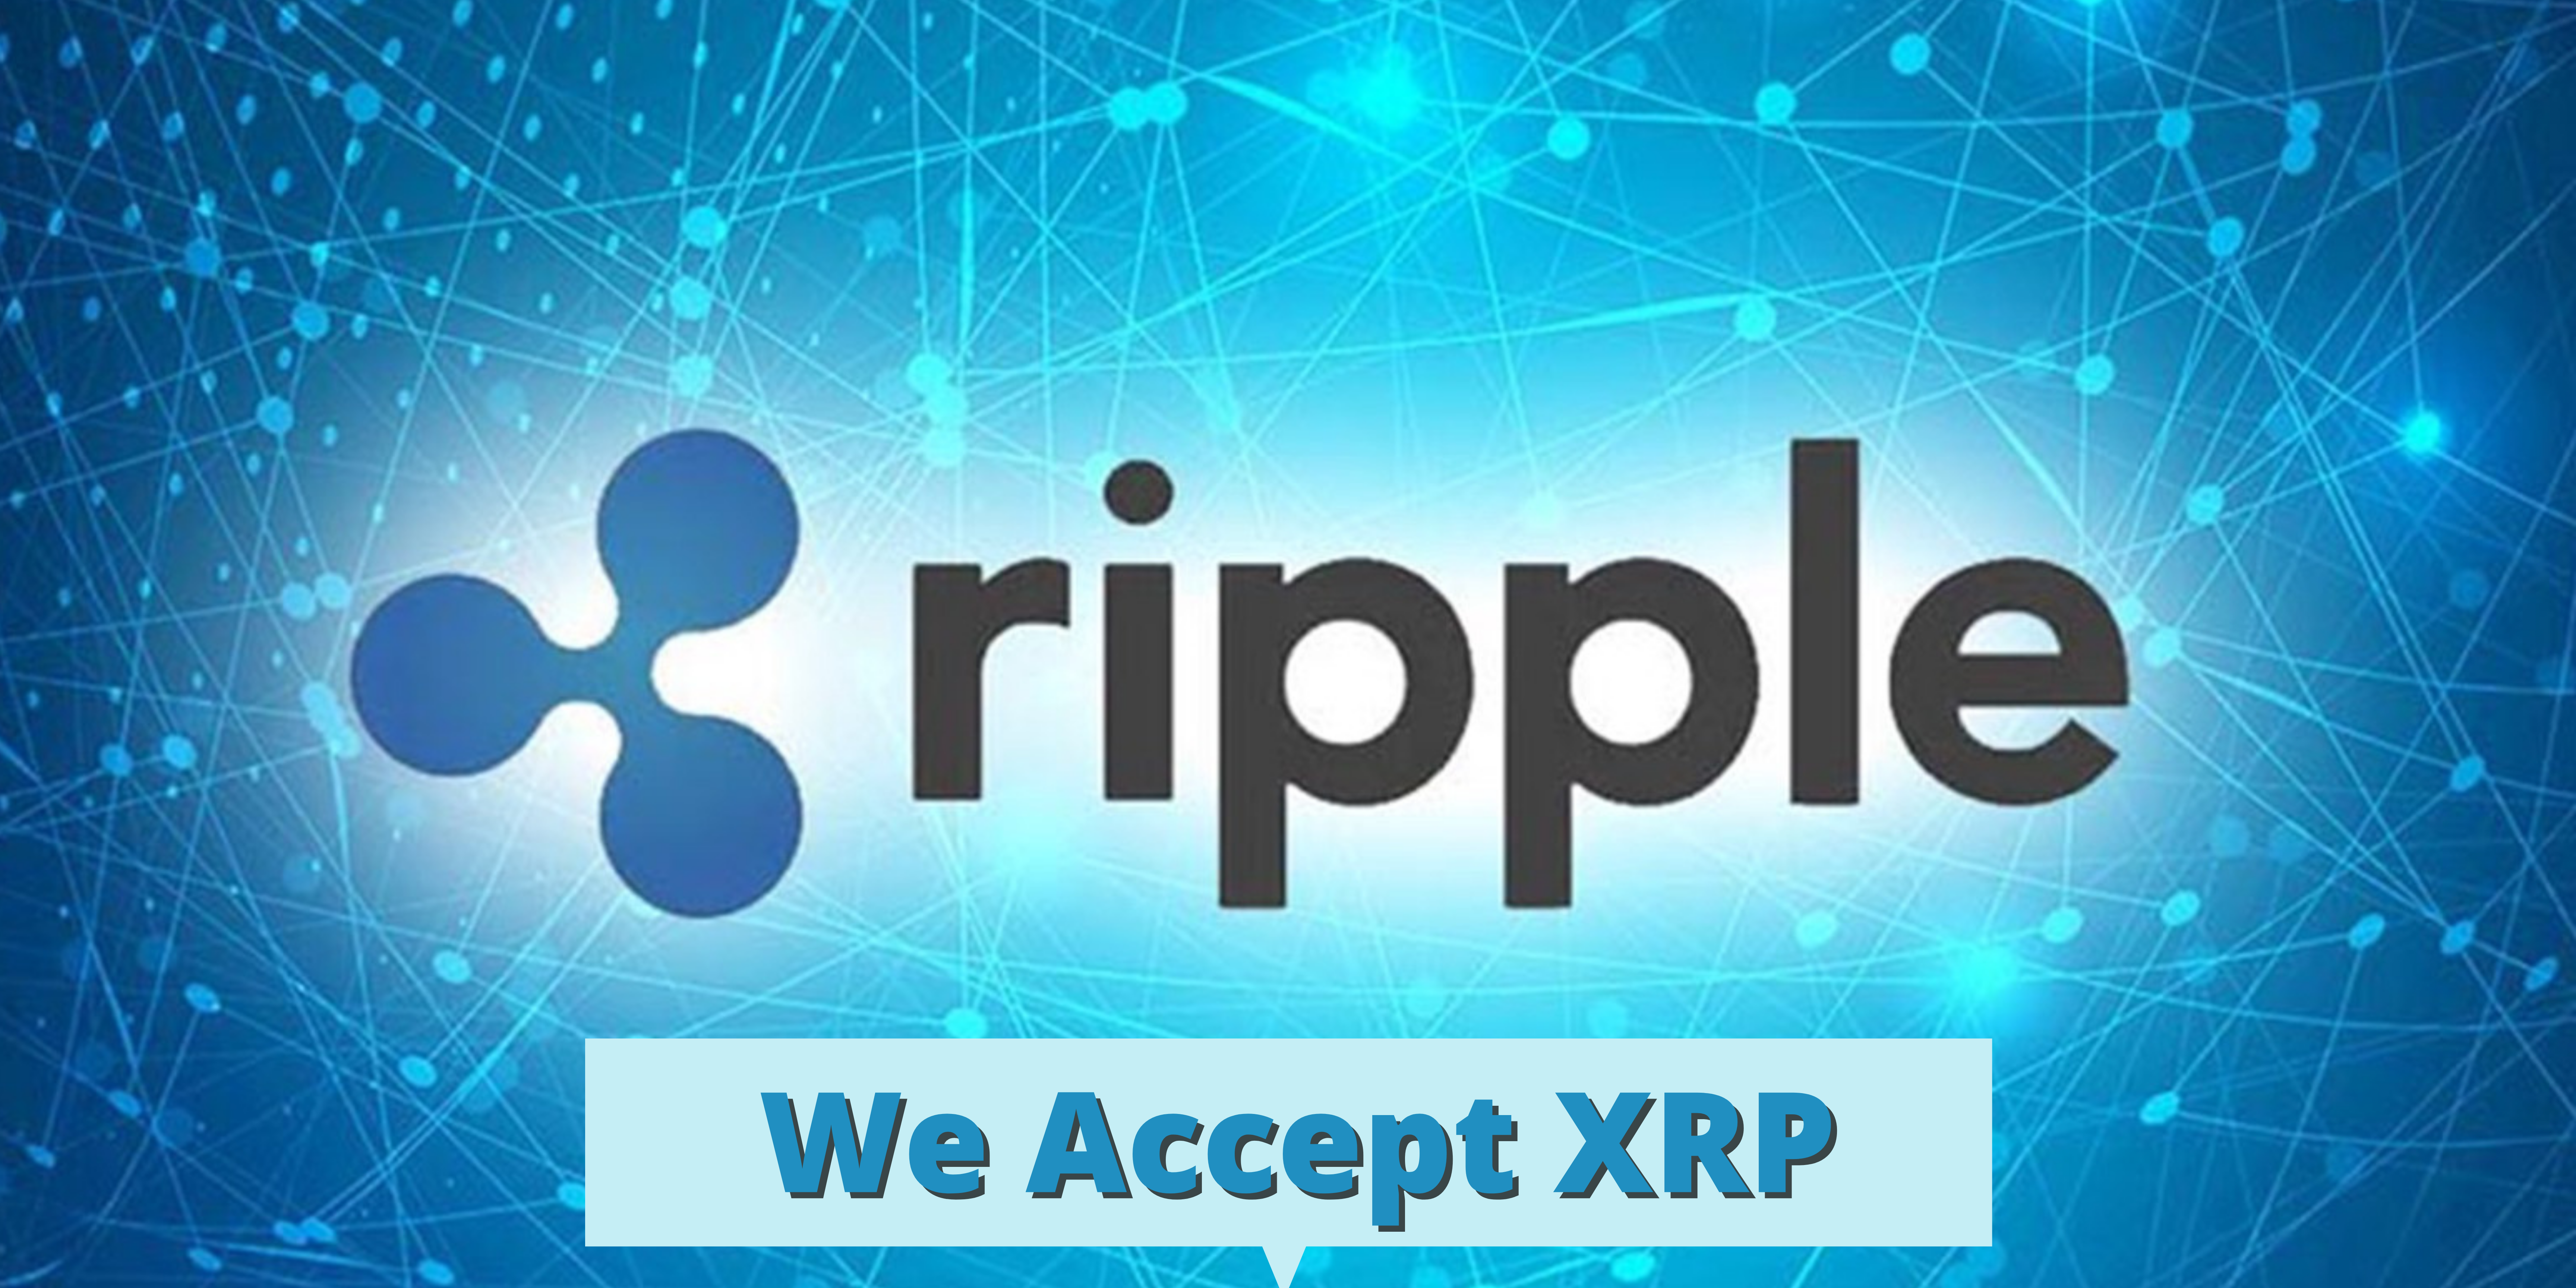 We Accept XRP